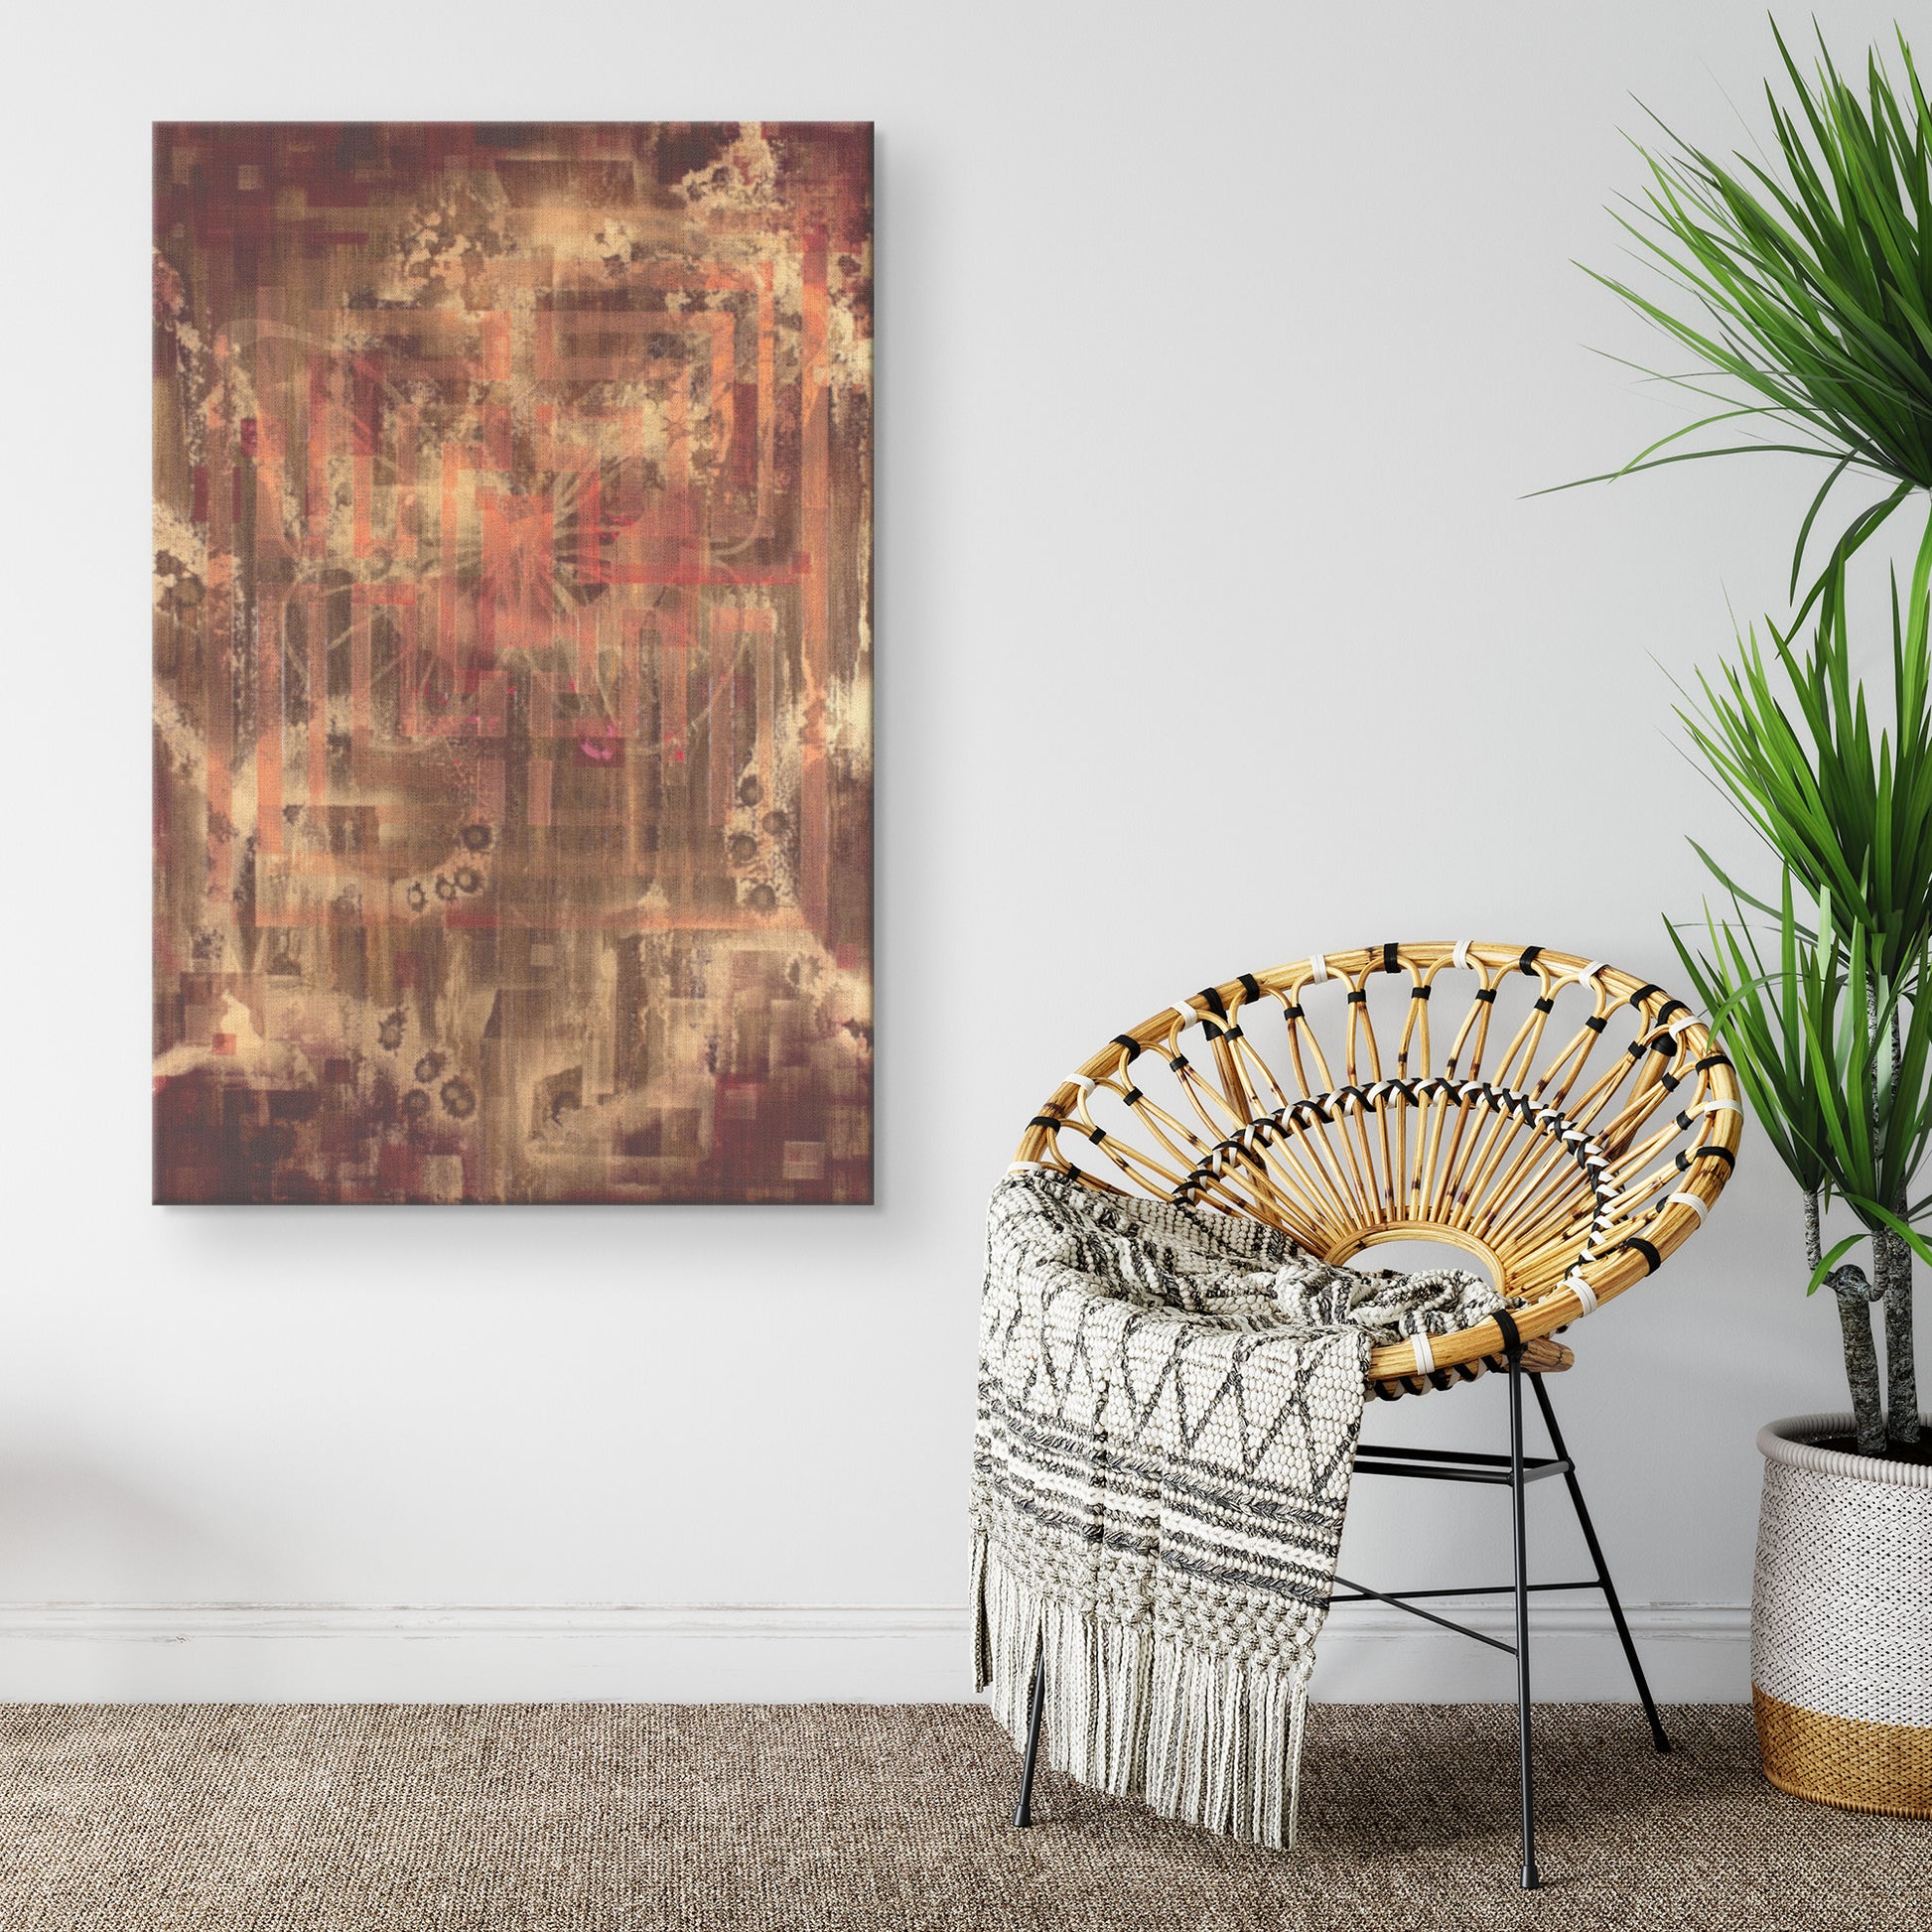 beautiful abstract art and decor for sale from a small business and independent artist